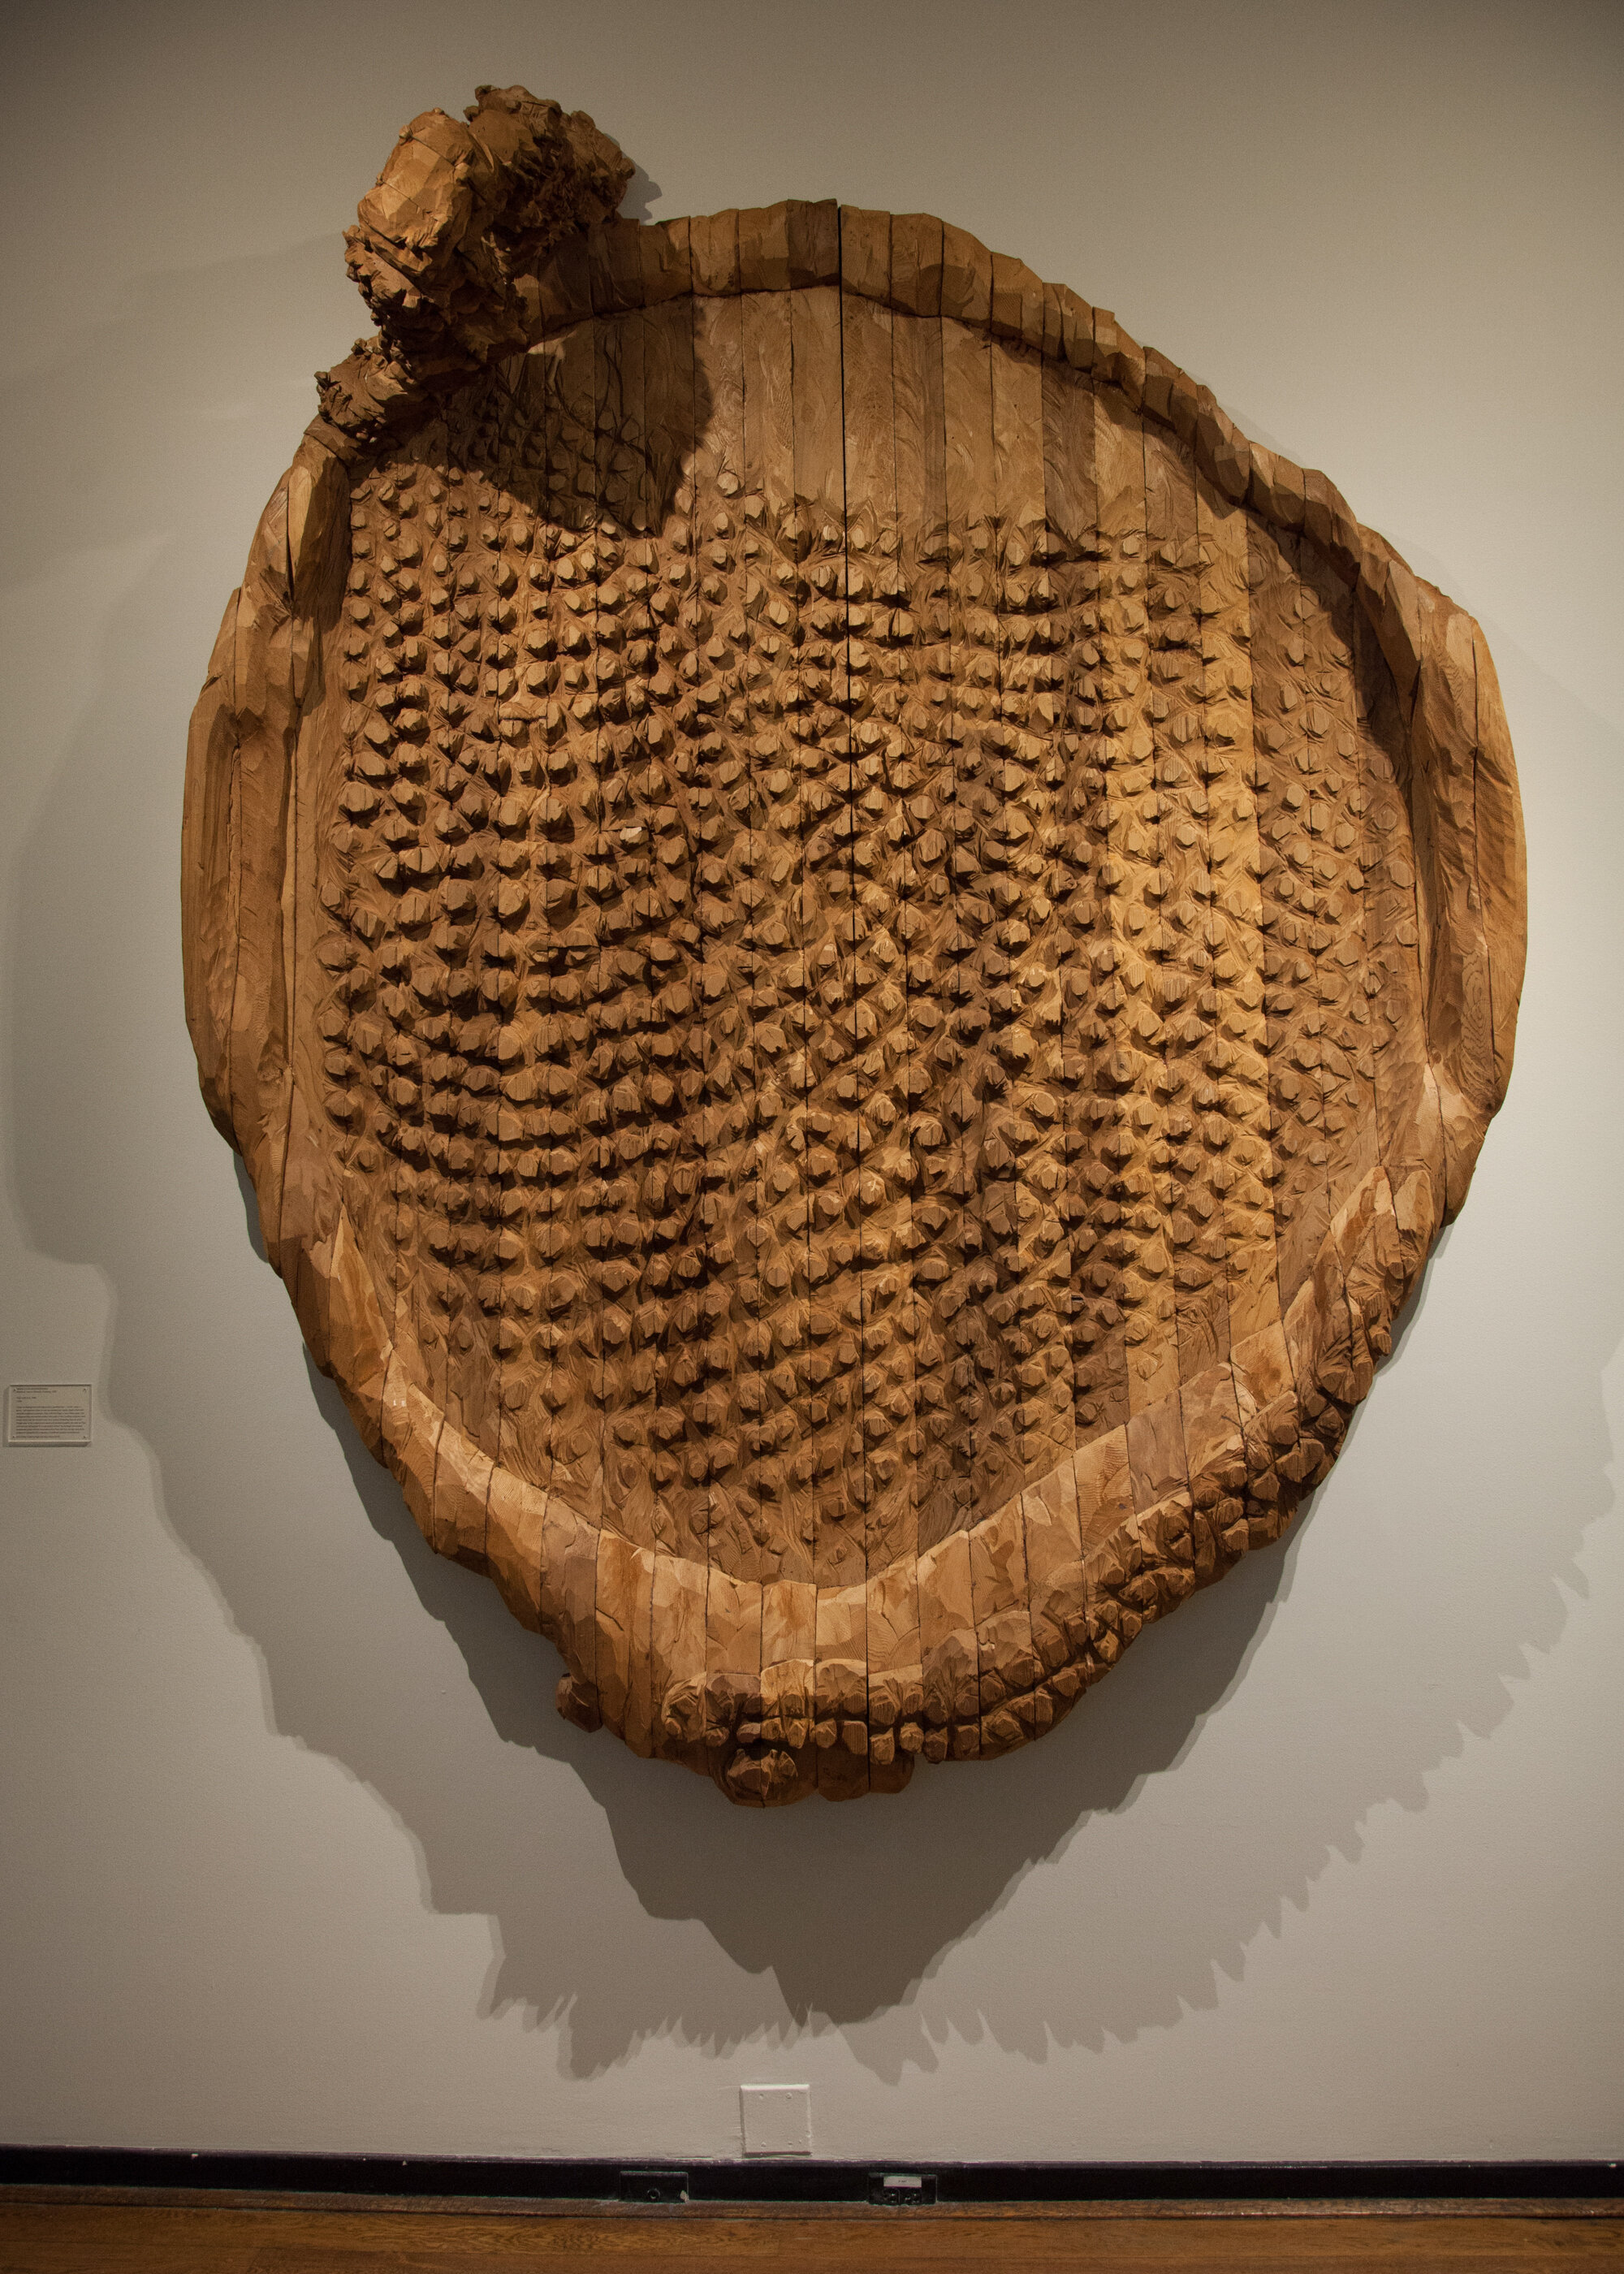       Plate with Dots , 2006 Cedar 115 x 89 x 3.5 in.    MORE IMAGES   The Rockefeller University  